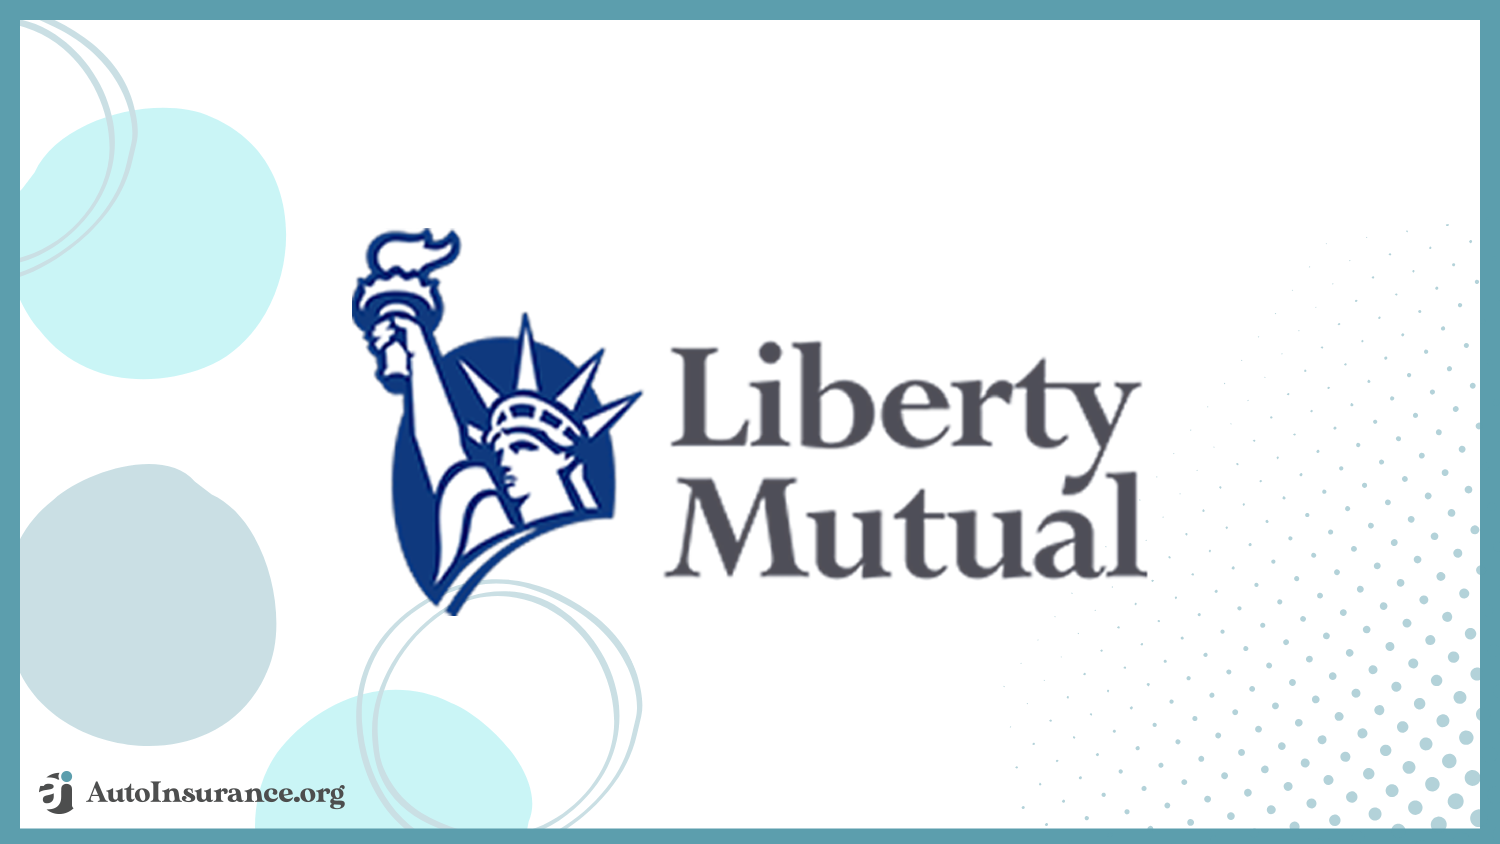 Liberty Mutual: Best Auto Insurance Companies for High-Risk Drivers